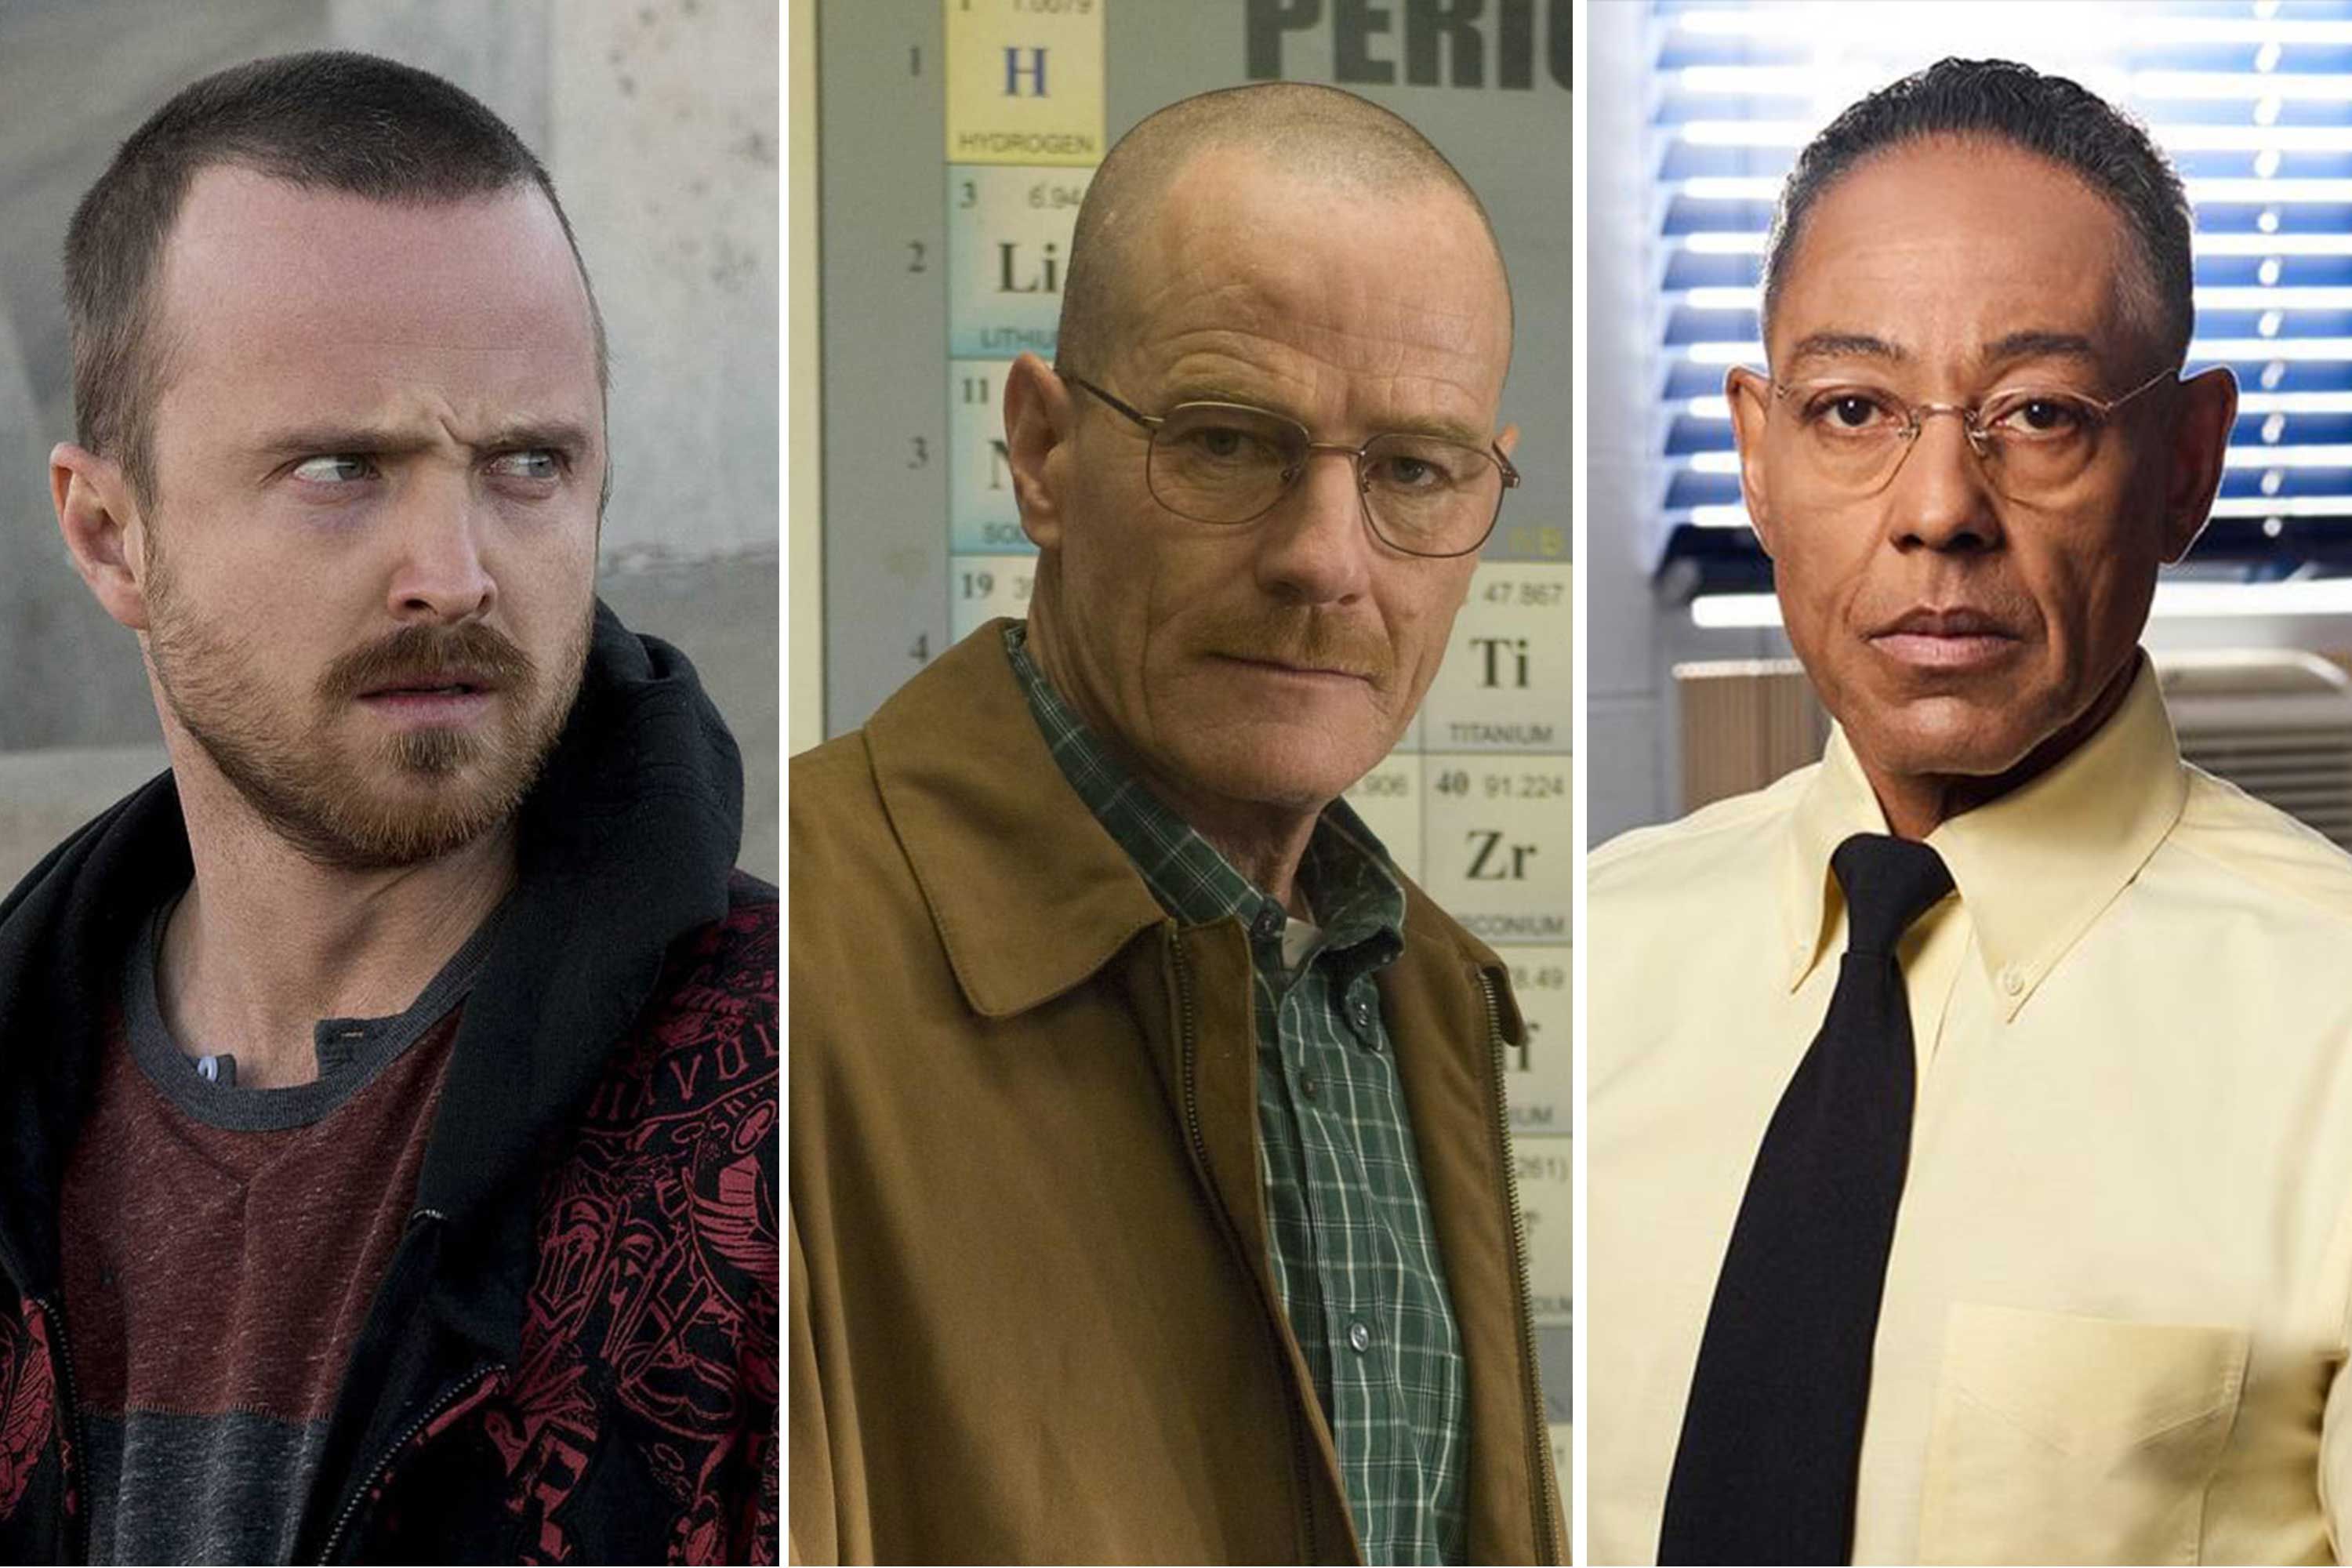 Breaking Bad' is one of the best TV series of all time